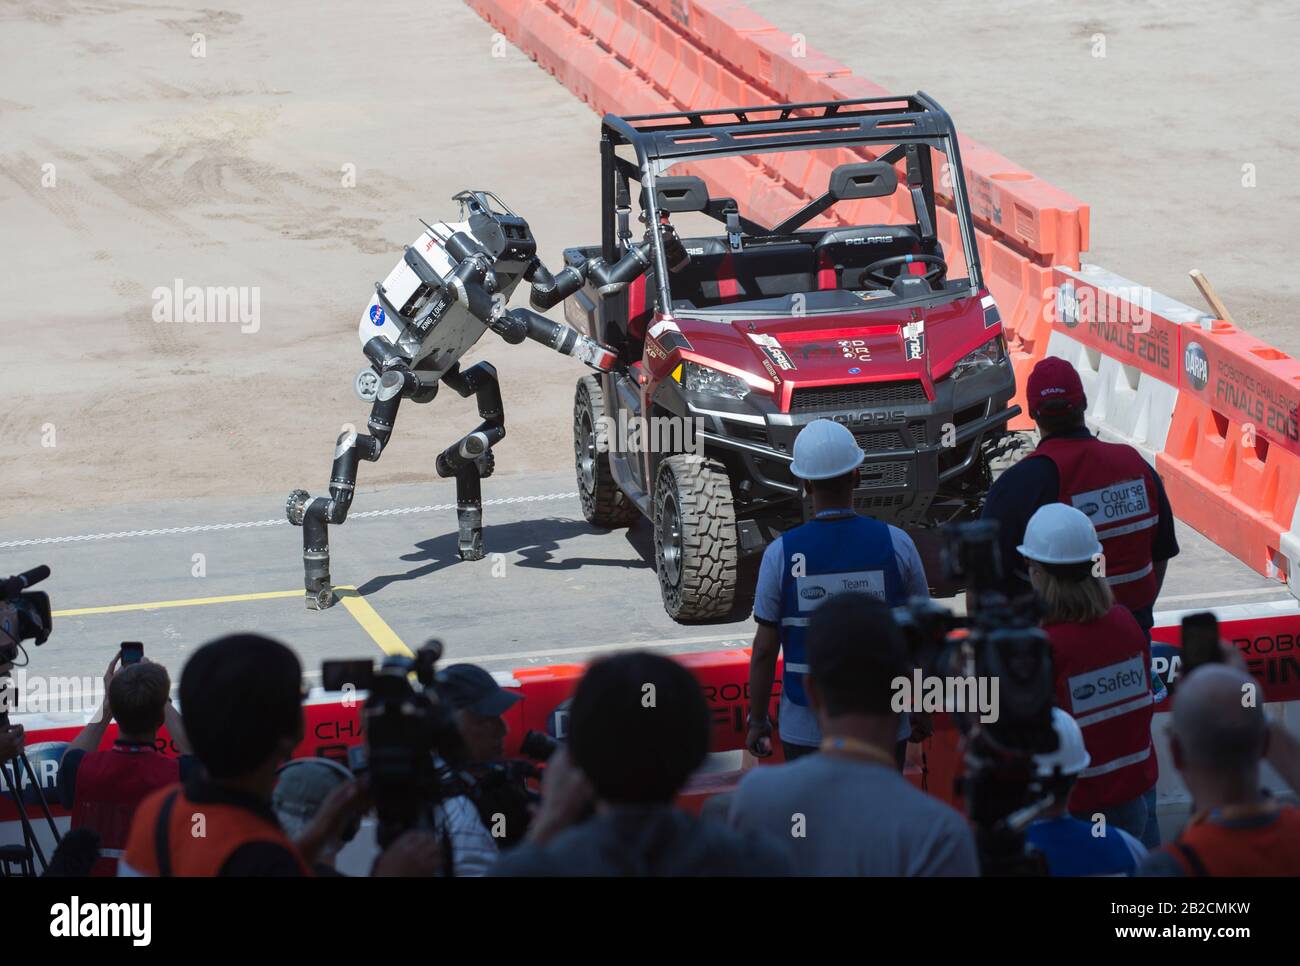 RoboSimian, a simian-inspired robot from NASA Jet Propulsion Labs, exits a vehicle independently on two feet during the Defense Advanced Research Projects Agency Robotics Challenge June 5, 2015 in Pomona, California. The robot was designed, fabricated and assembled by engineering students at Virginia Tech. Stock Photo